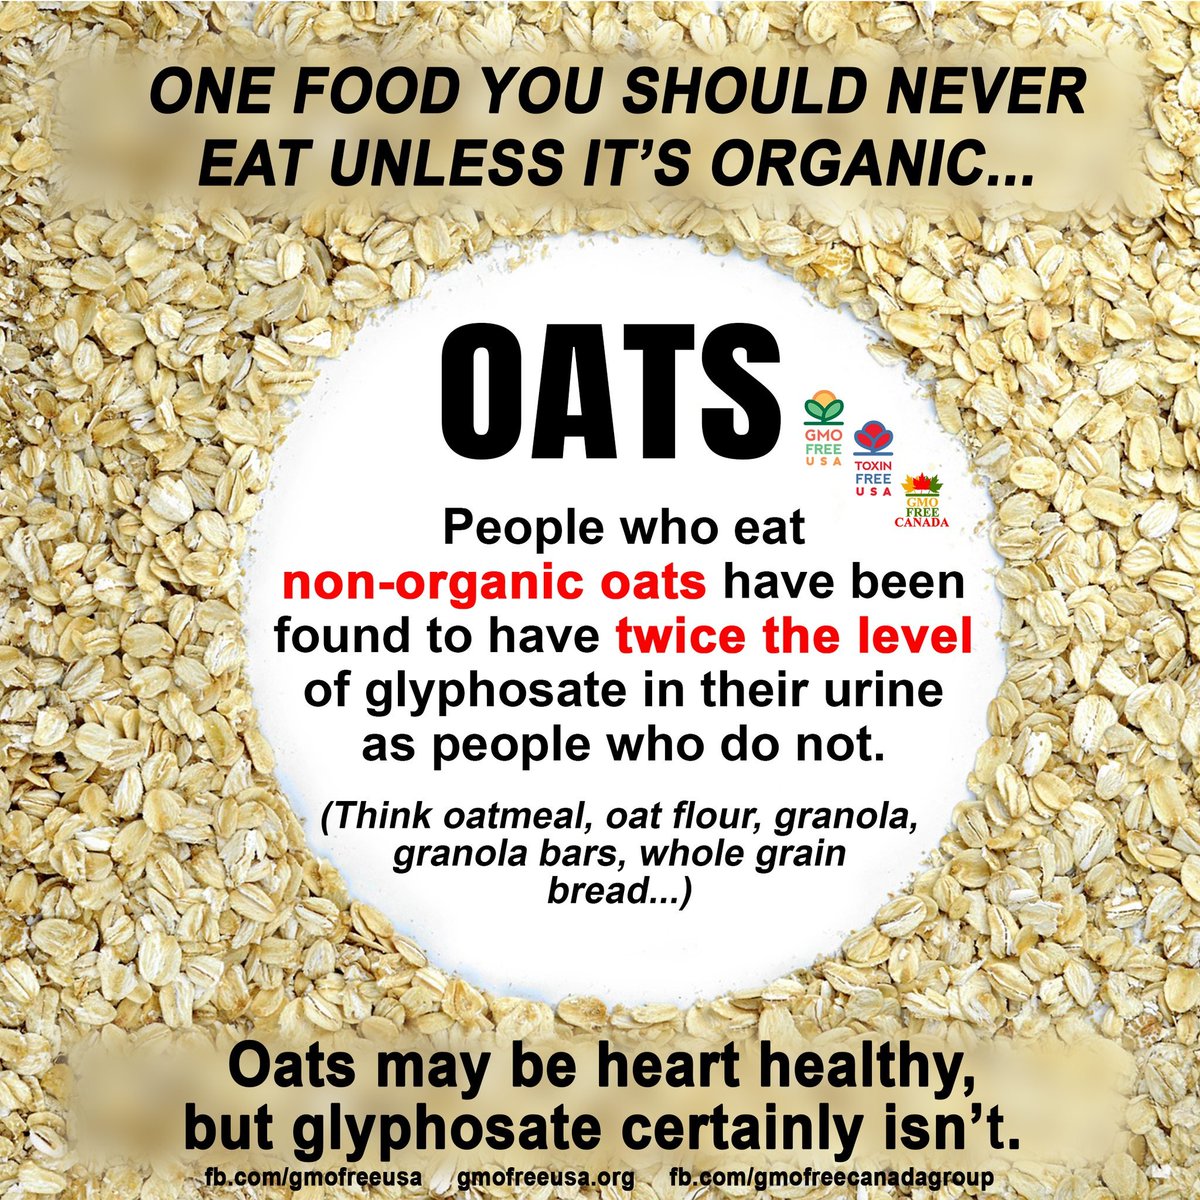 Most people are not aware that #oats are sprayed with #glyphosate-based herbicides. How is that heart-healthy? Glyphosate in conventional oats (EWG testing): tinyurl.com/GlyphosateInOa… Glyphosate urine levels drop after switching to an organic diet: tinyurl.com/OrganicDietRed…